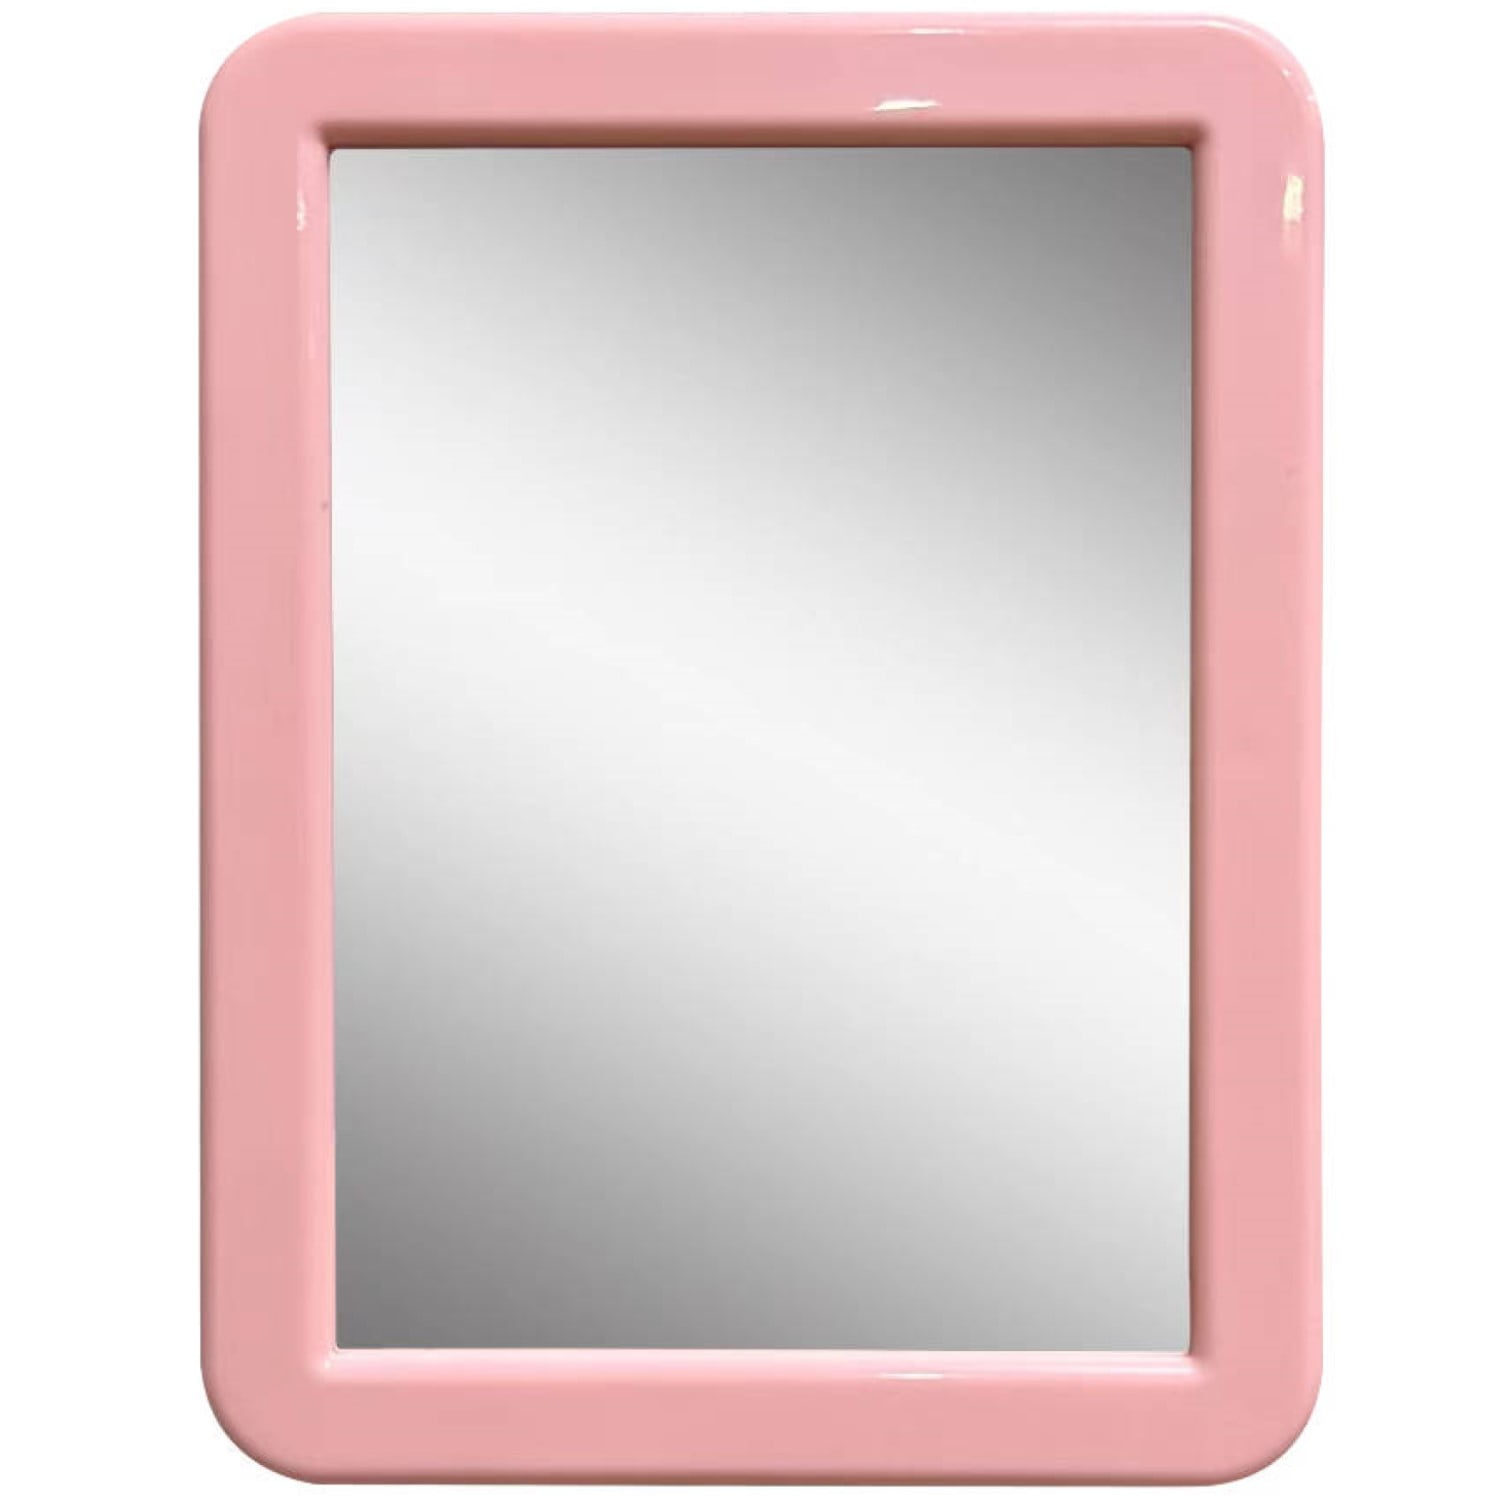 CEREM Magnetic Locker Mirror, Light Pink 5 x 7 - Real Glass Make-up  Mirror - Locker Accessory for School, Home, Gym, Office